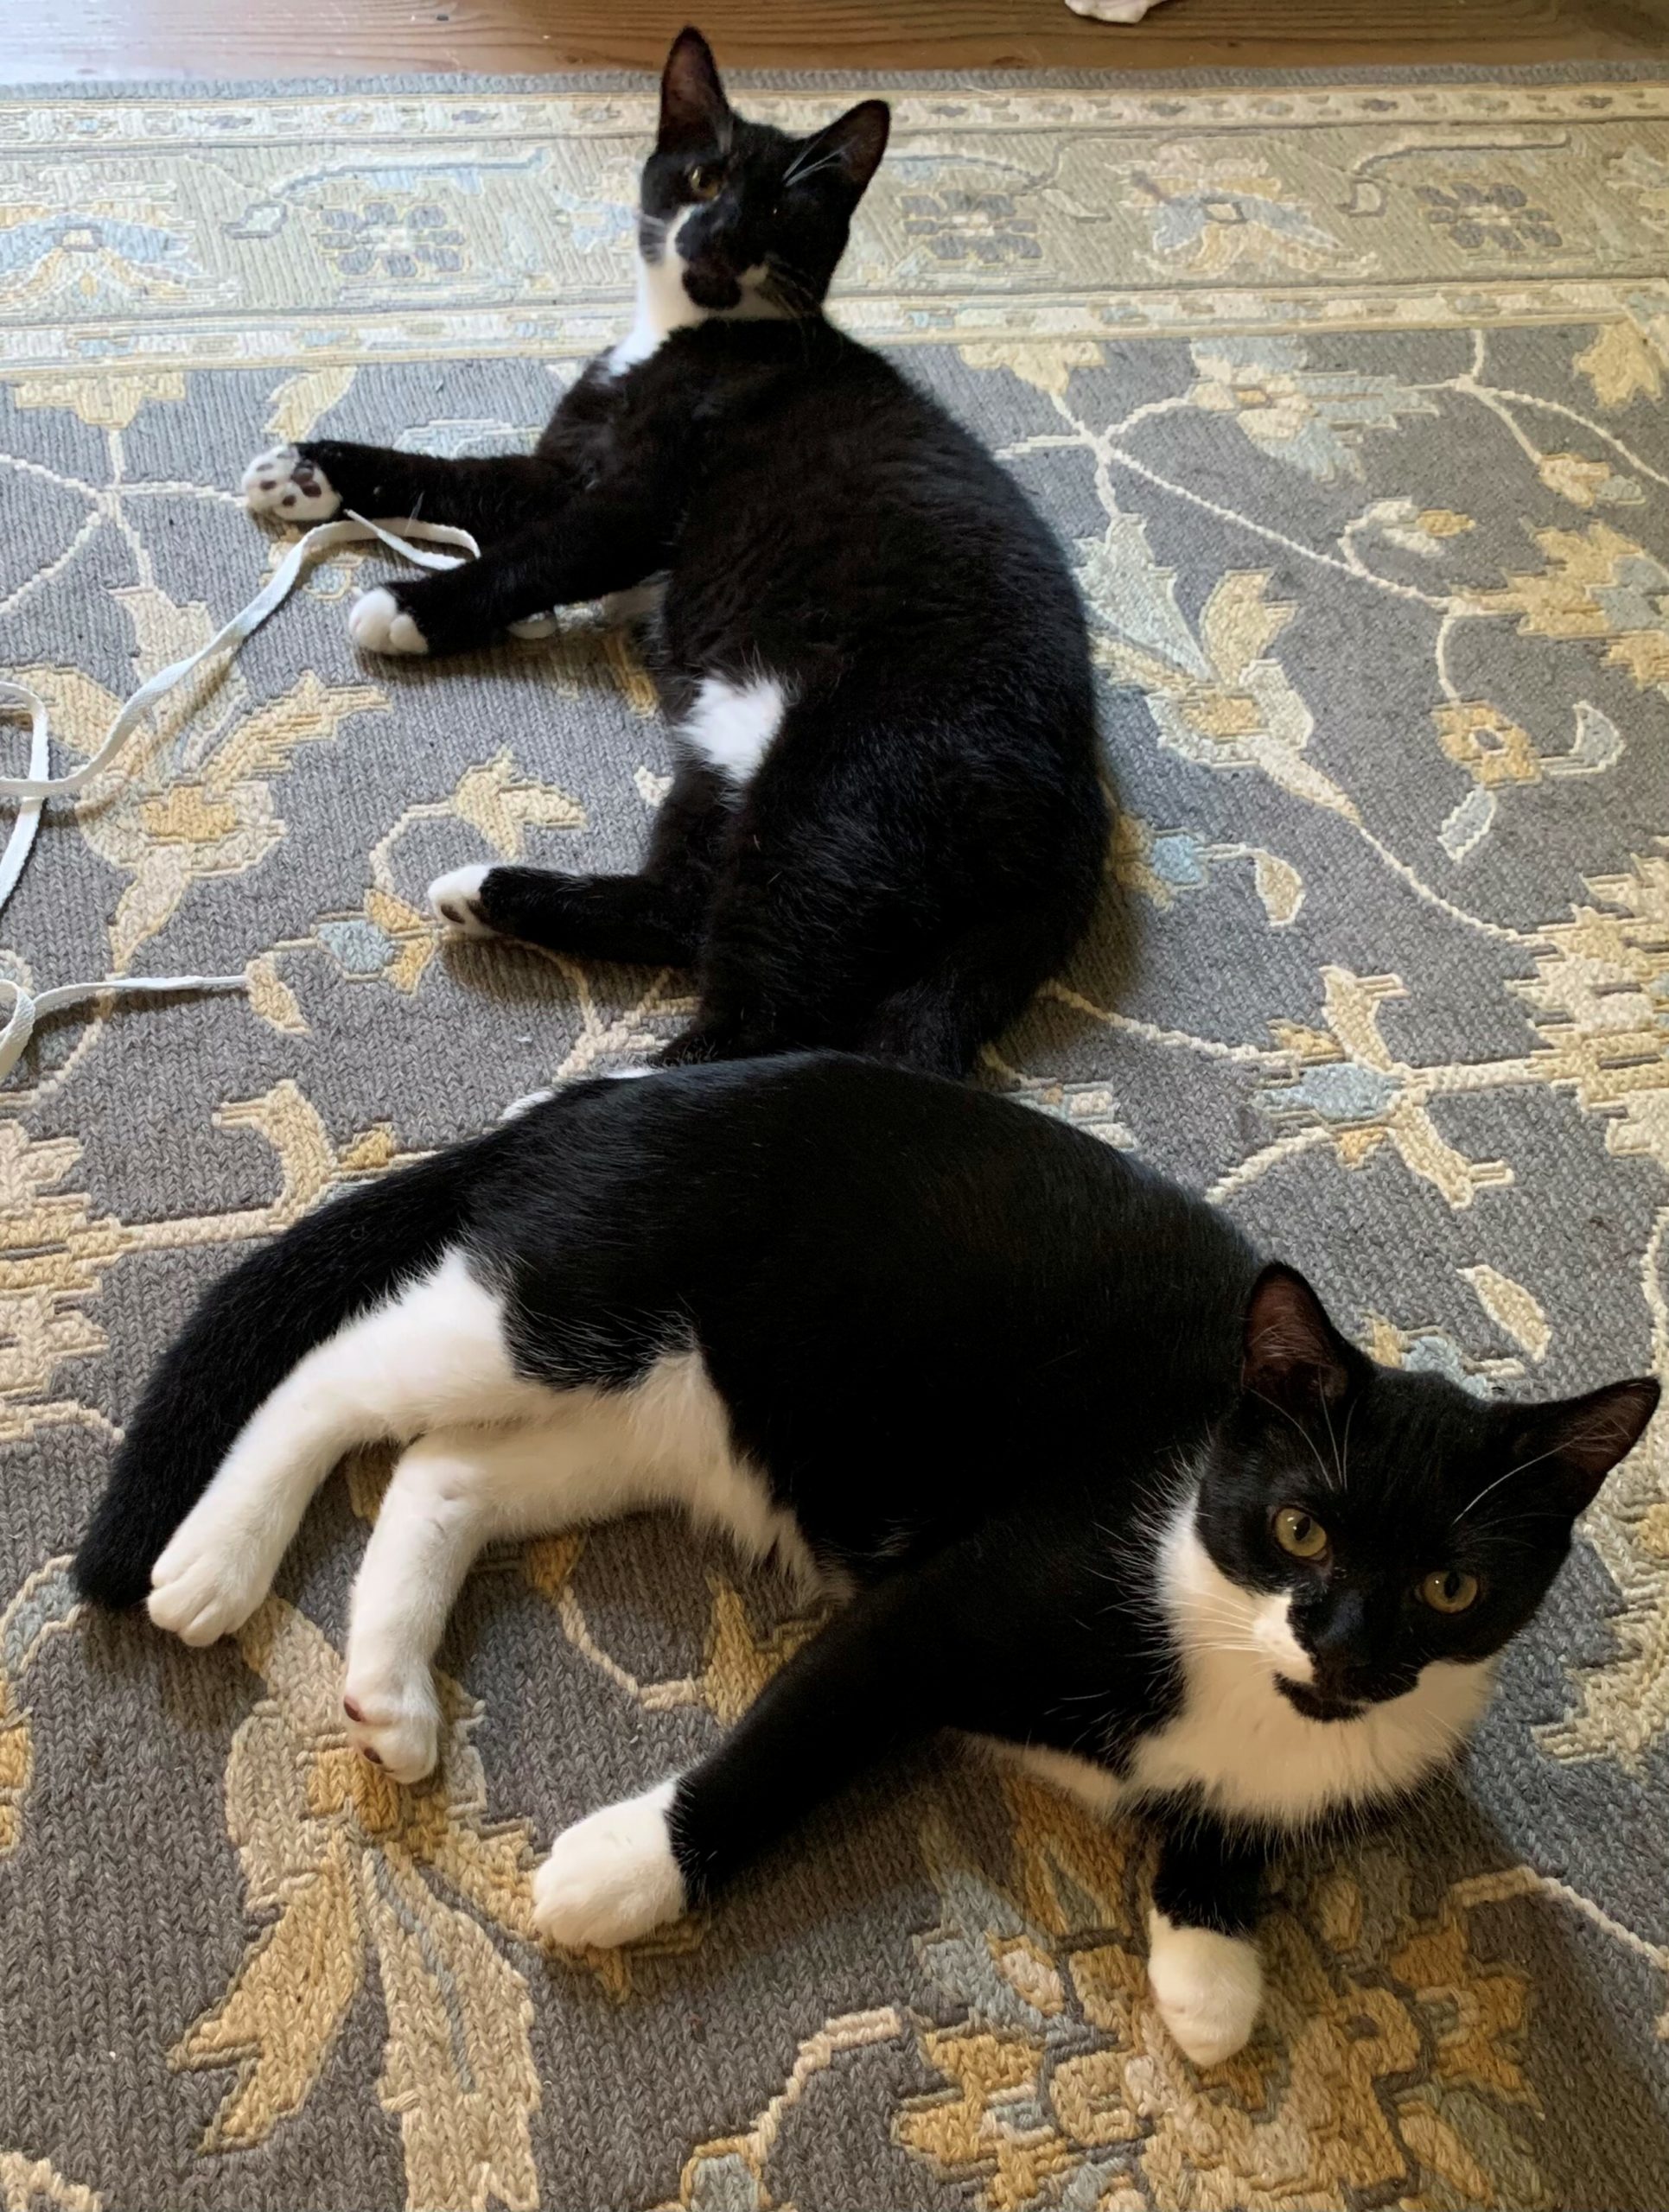 Five-month-old kittens Martin and Davis are currently living in a foster home and are available for adoption.